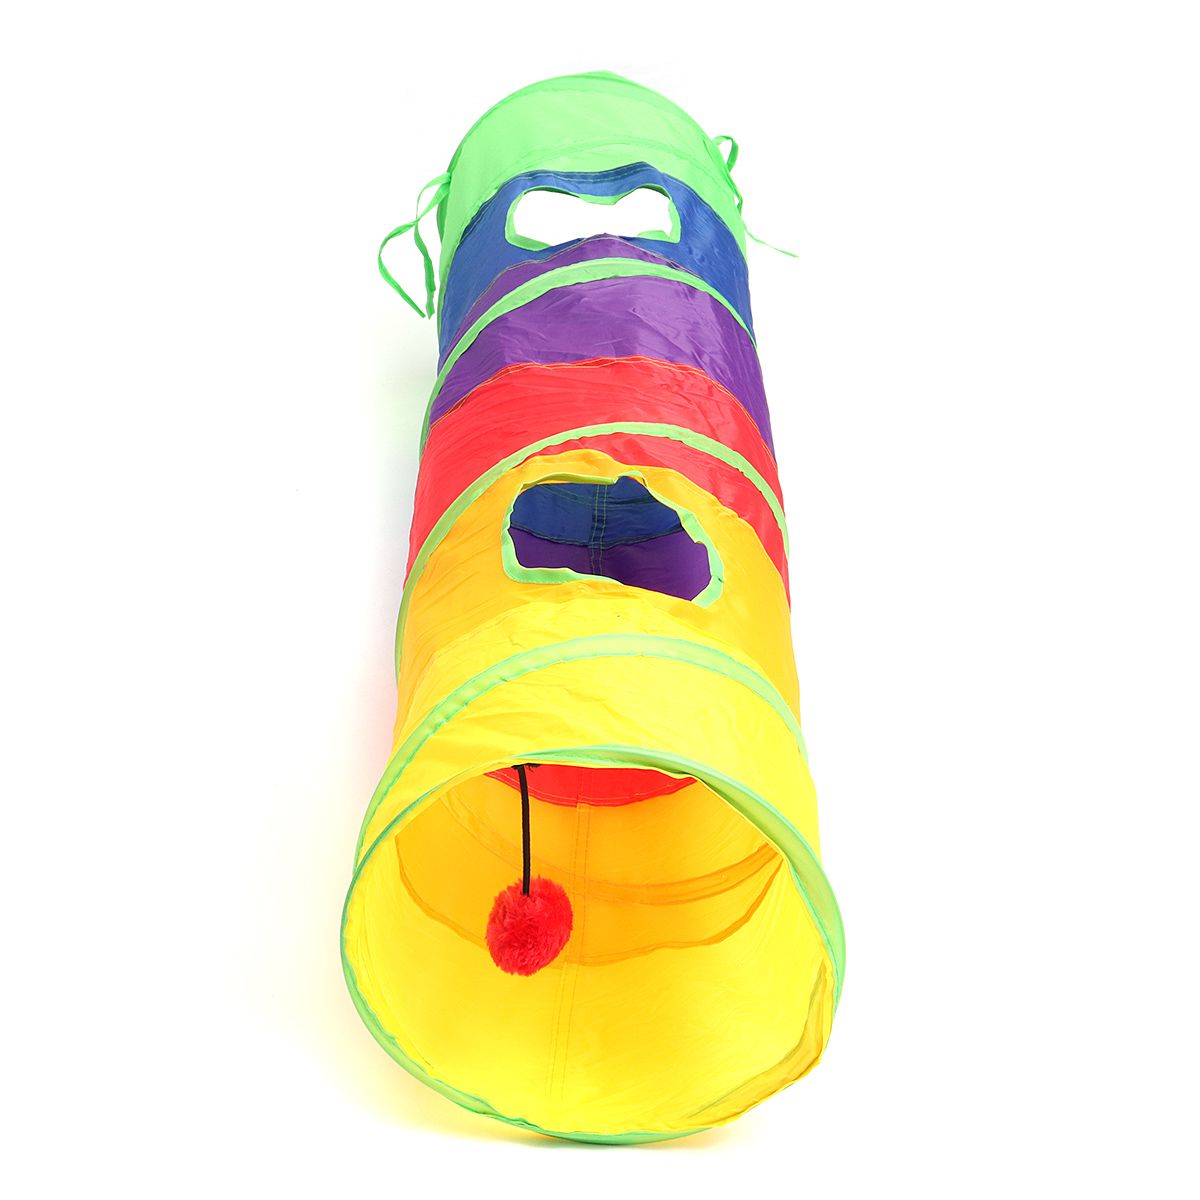 Pet-Tunnel-Cat-Printed-Green-Crinkly-Tunnel-Toy-With-Ball-Play-Fun-Toys-1322549